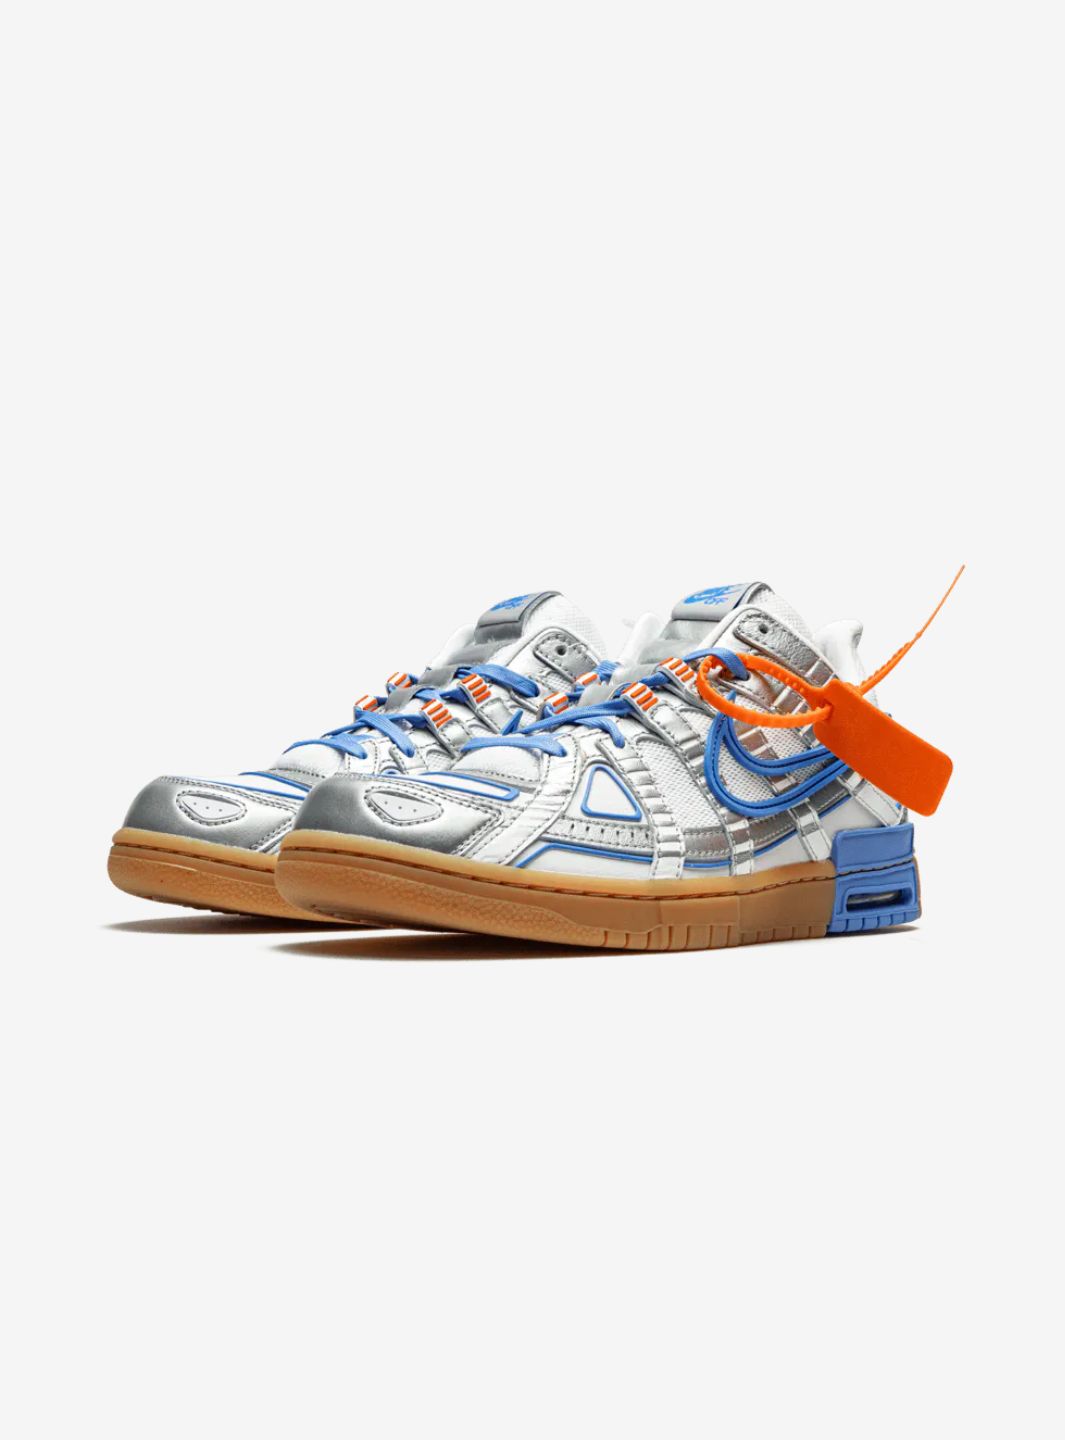 Nike Air Rubber Dunk Off-White UNC - CU6015-100 | ResellZone